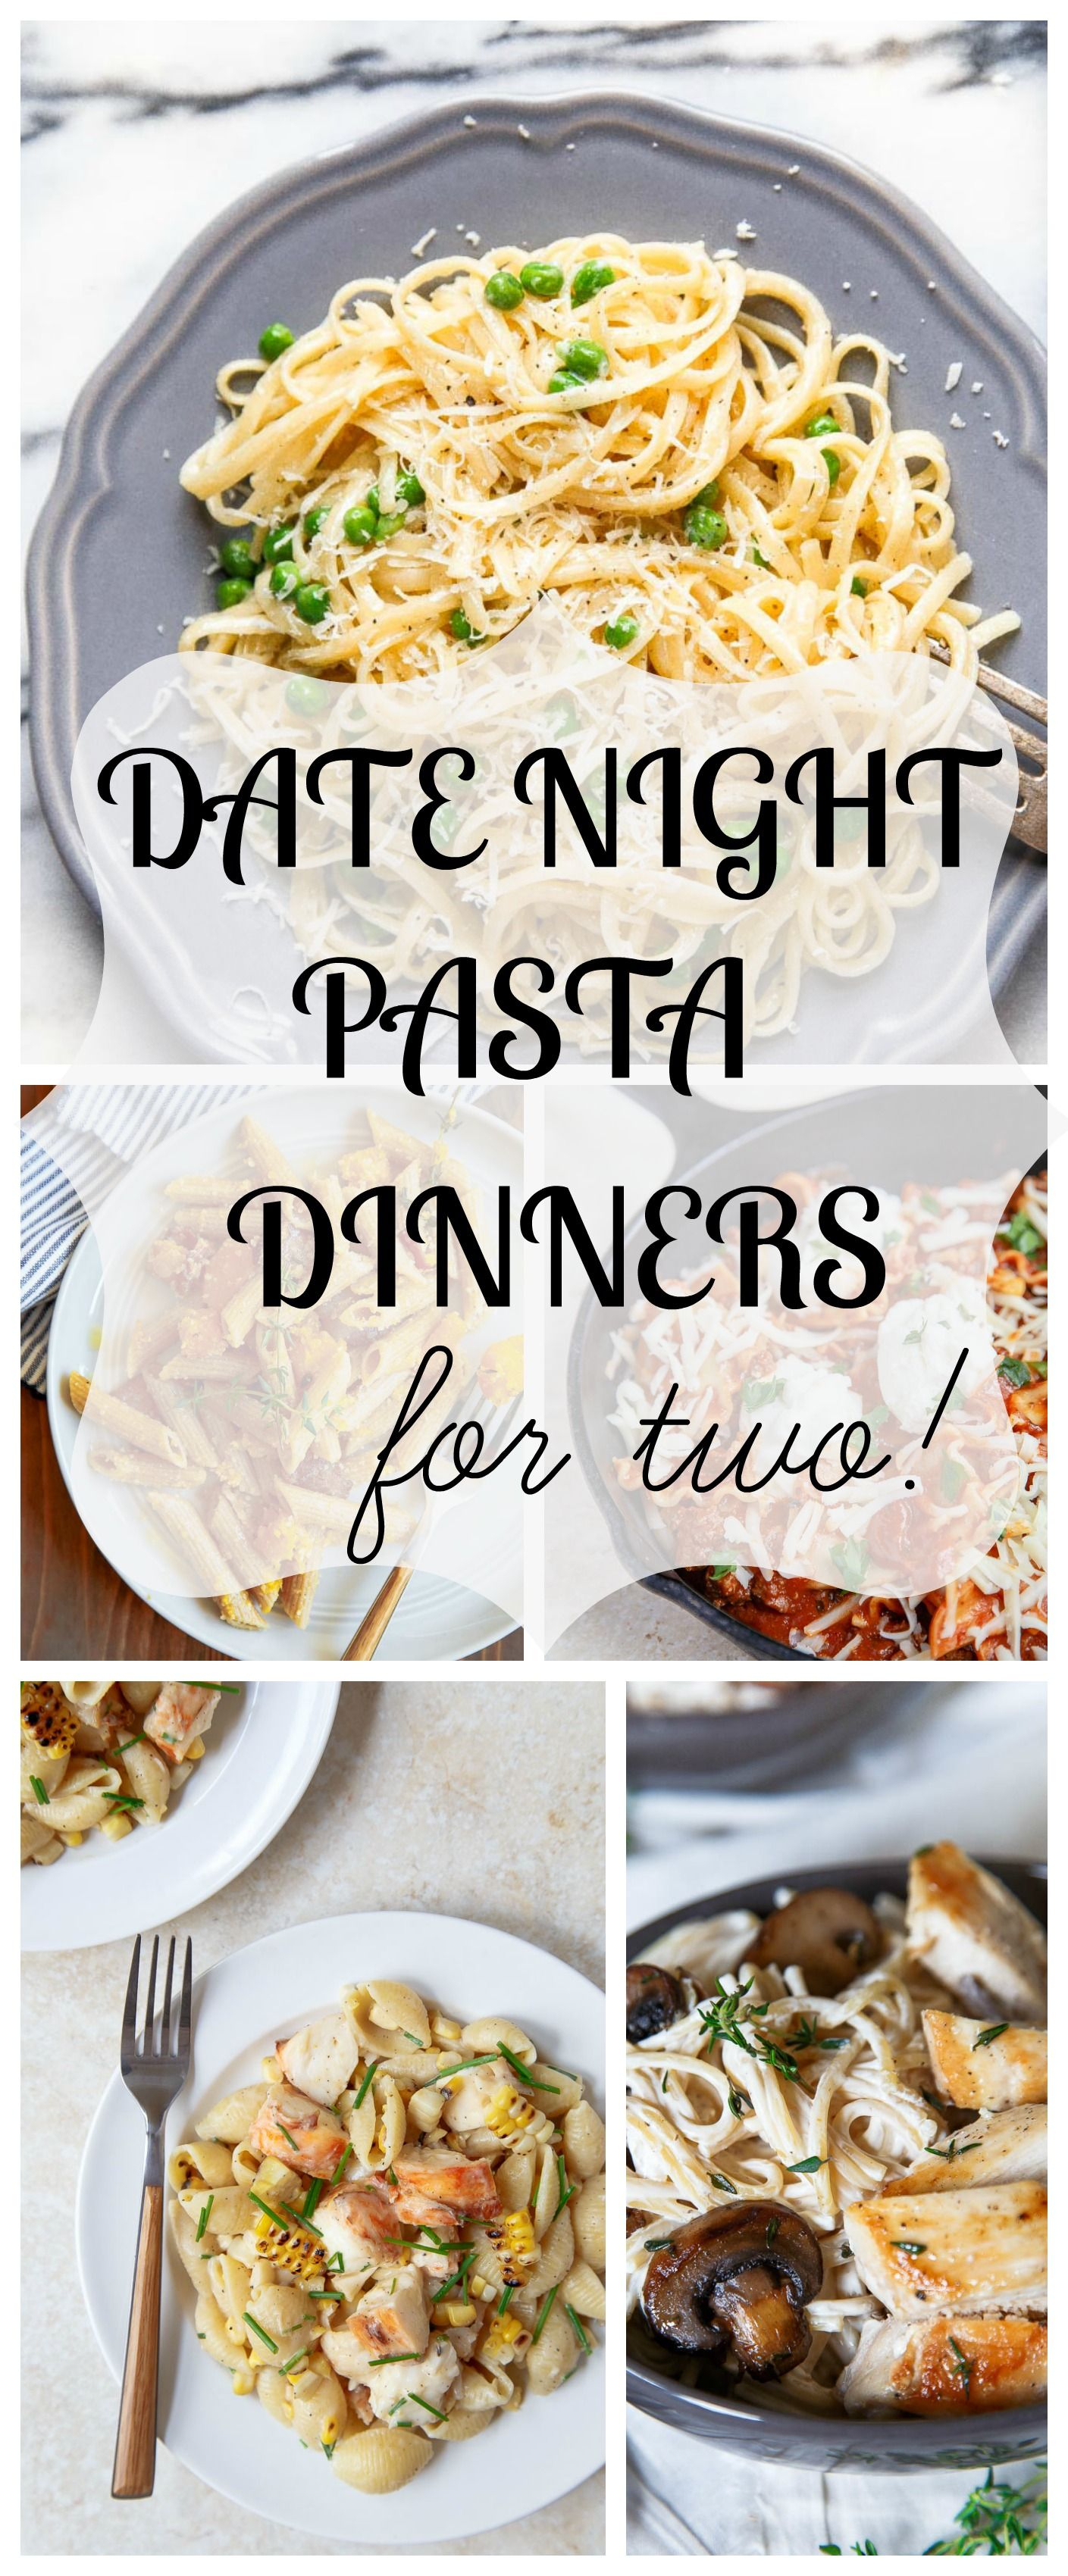 10 Beautiful Ideas For Dinner Tonight For Two dinner for two date night dinners featuring pasta for two next 2022